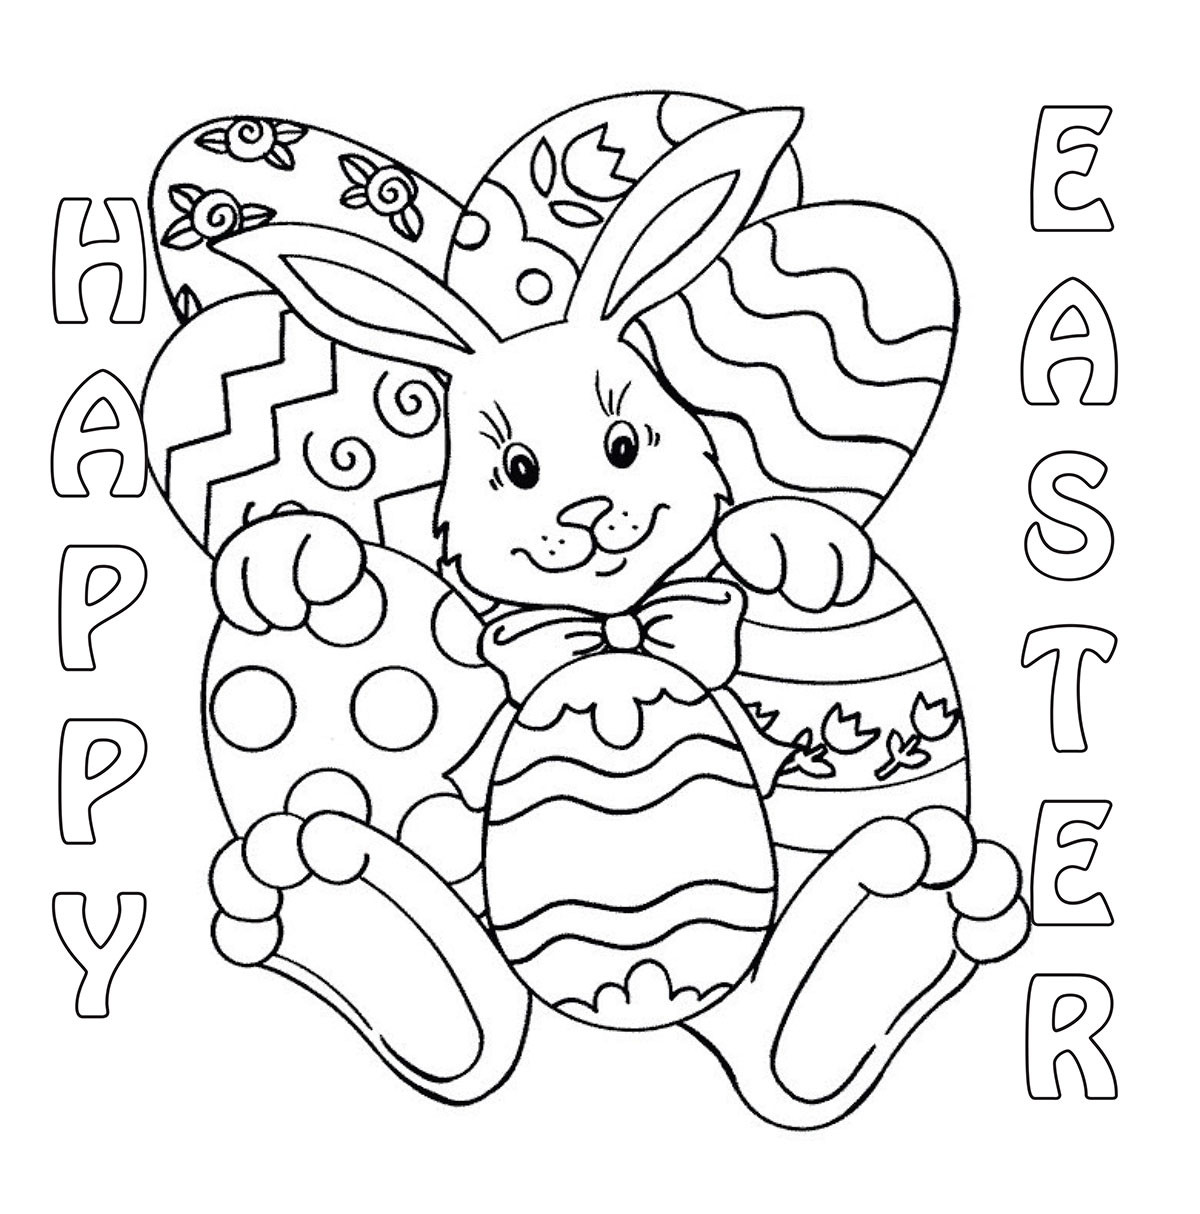 Happy Easter Coloring Pages
 Easter Coloring Contest Sheets – Happy Easter